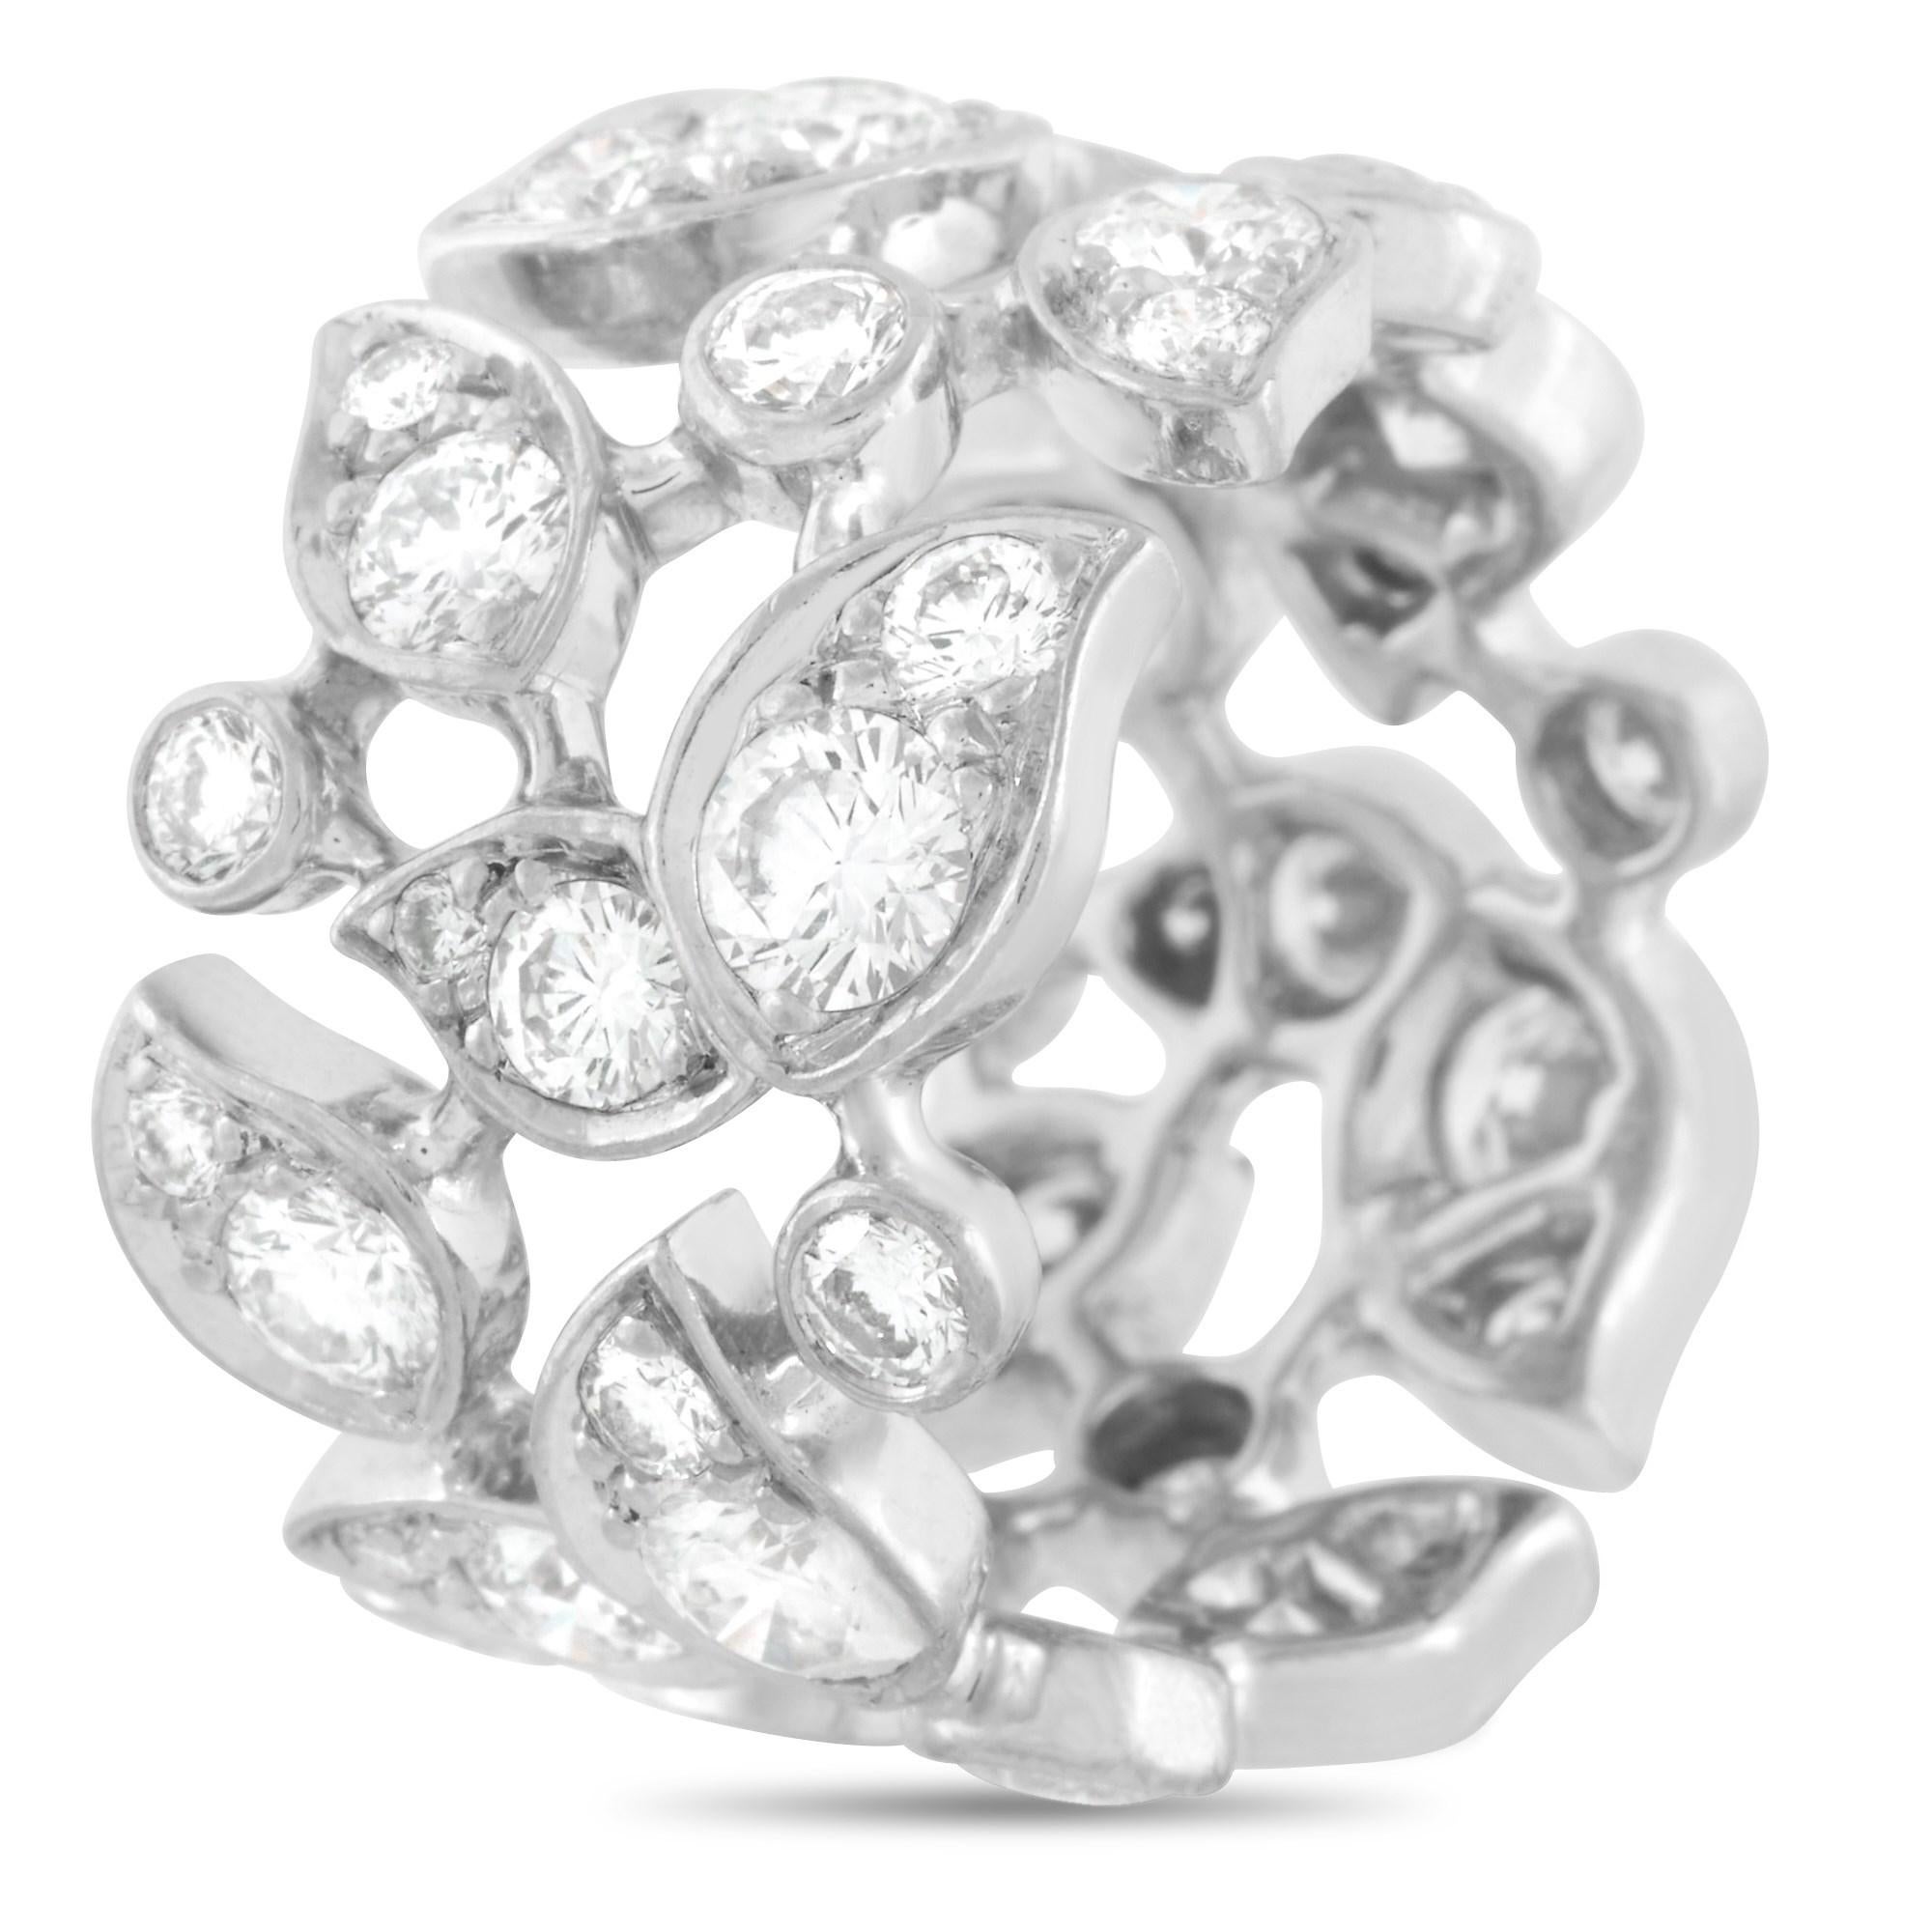 The Cartier 18K White Gold 4.50 ct Diamond Sculpted Vine Eternity Ring features a 12mm sculpted band featuring round and leaf-shaped white gold bezels. Absolutely stunning E-VVS diamonds dot every round and leaf-shaped bezel to form a vine-like